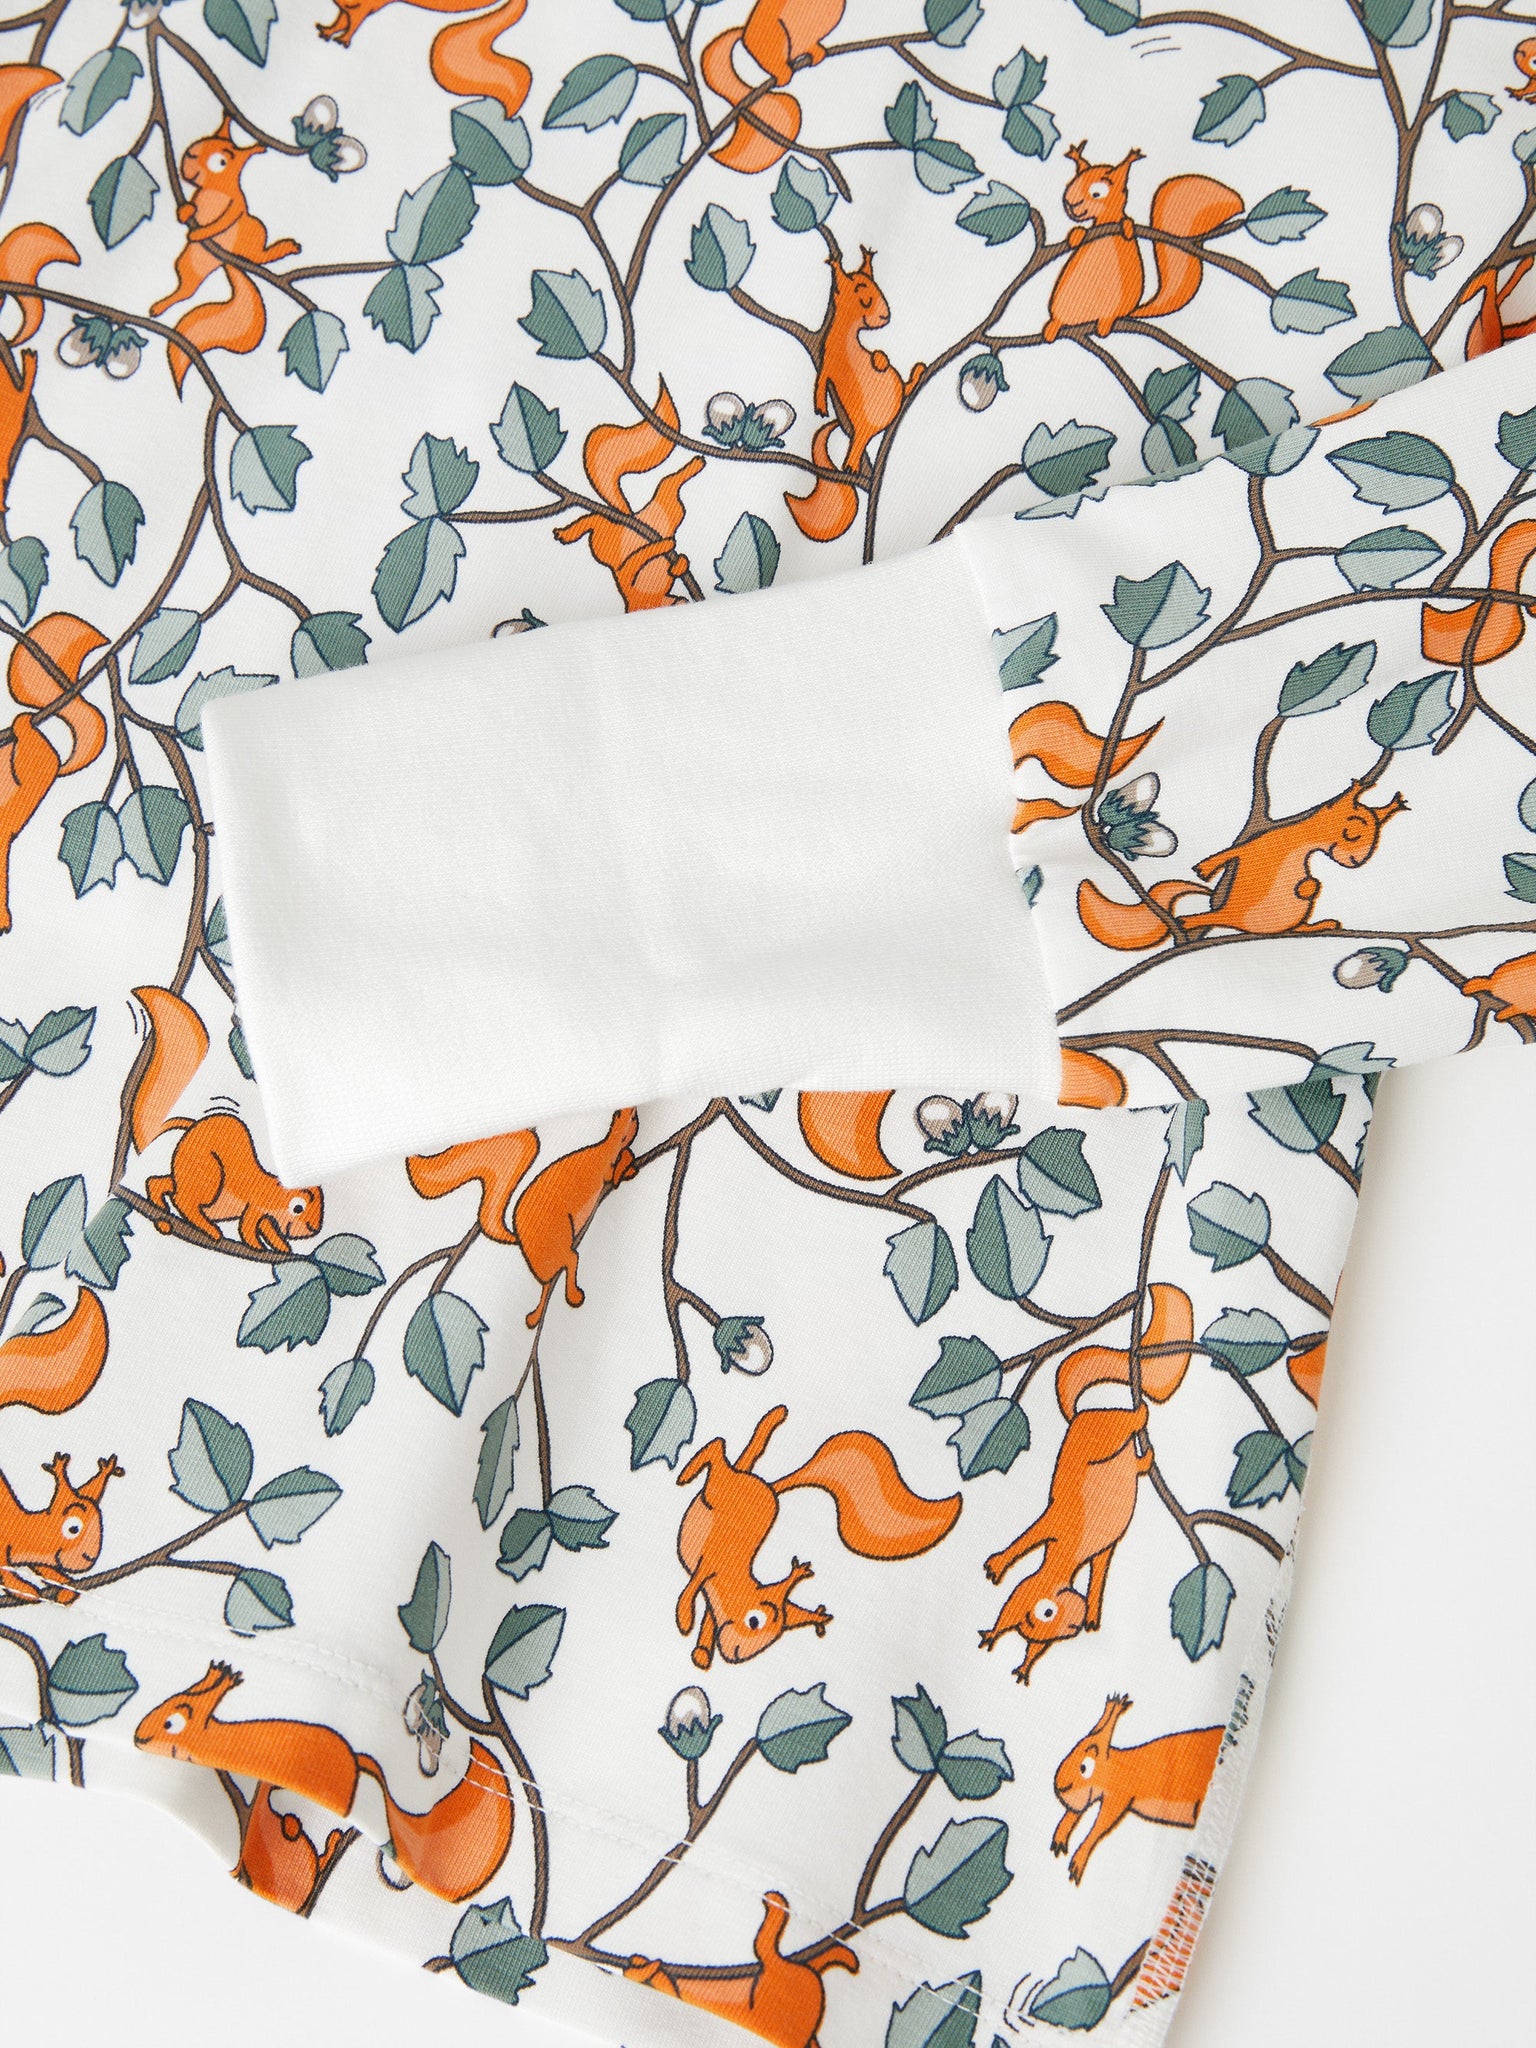 Squirrel Print Kids White Pyjamas from the Polarn O. Pyret kids collection. The best ethical kids clothes